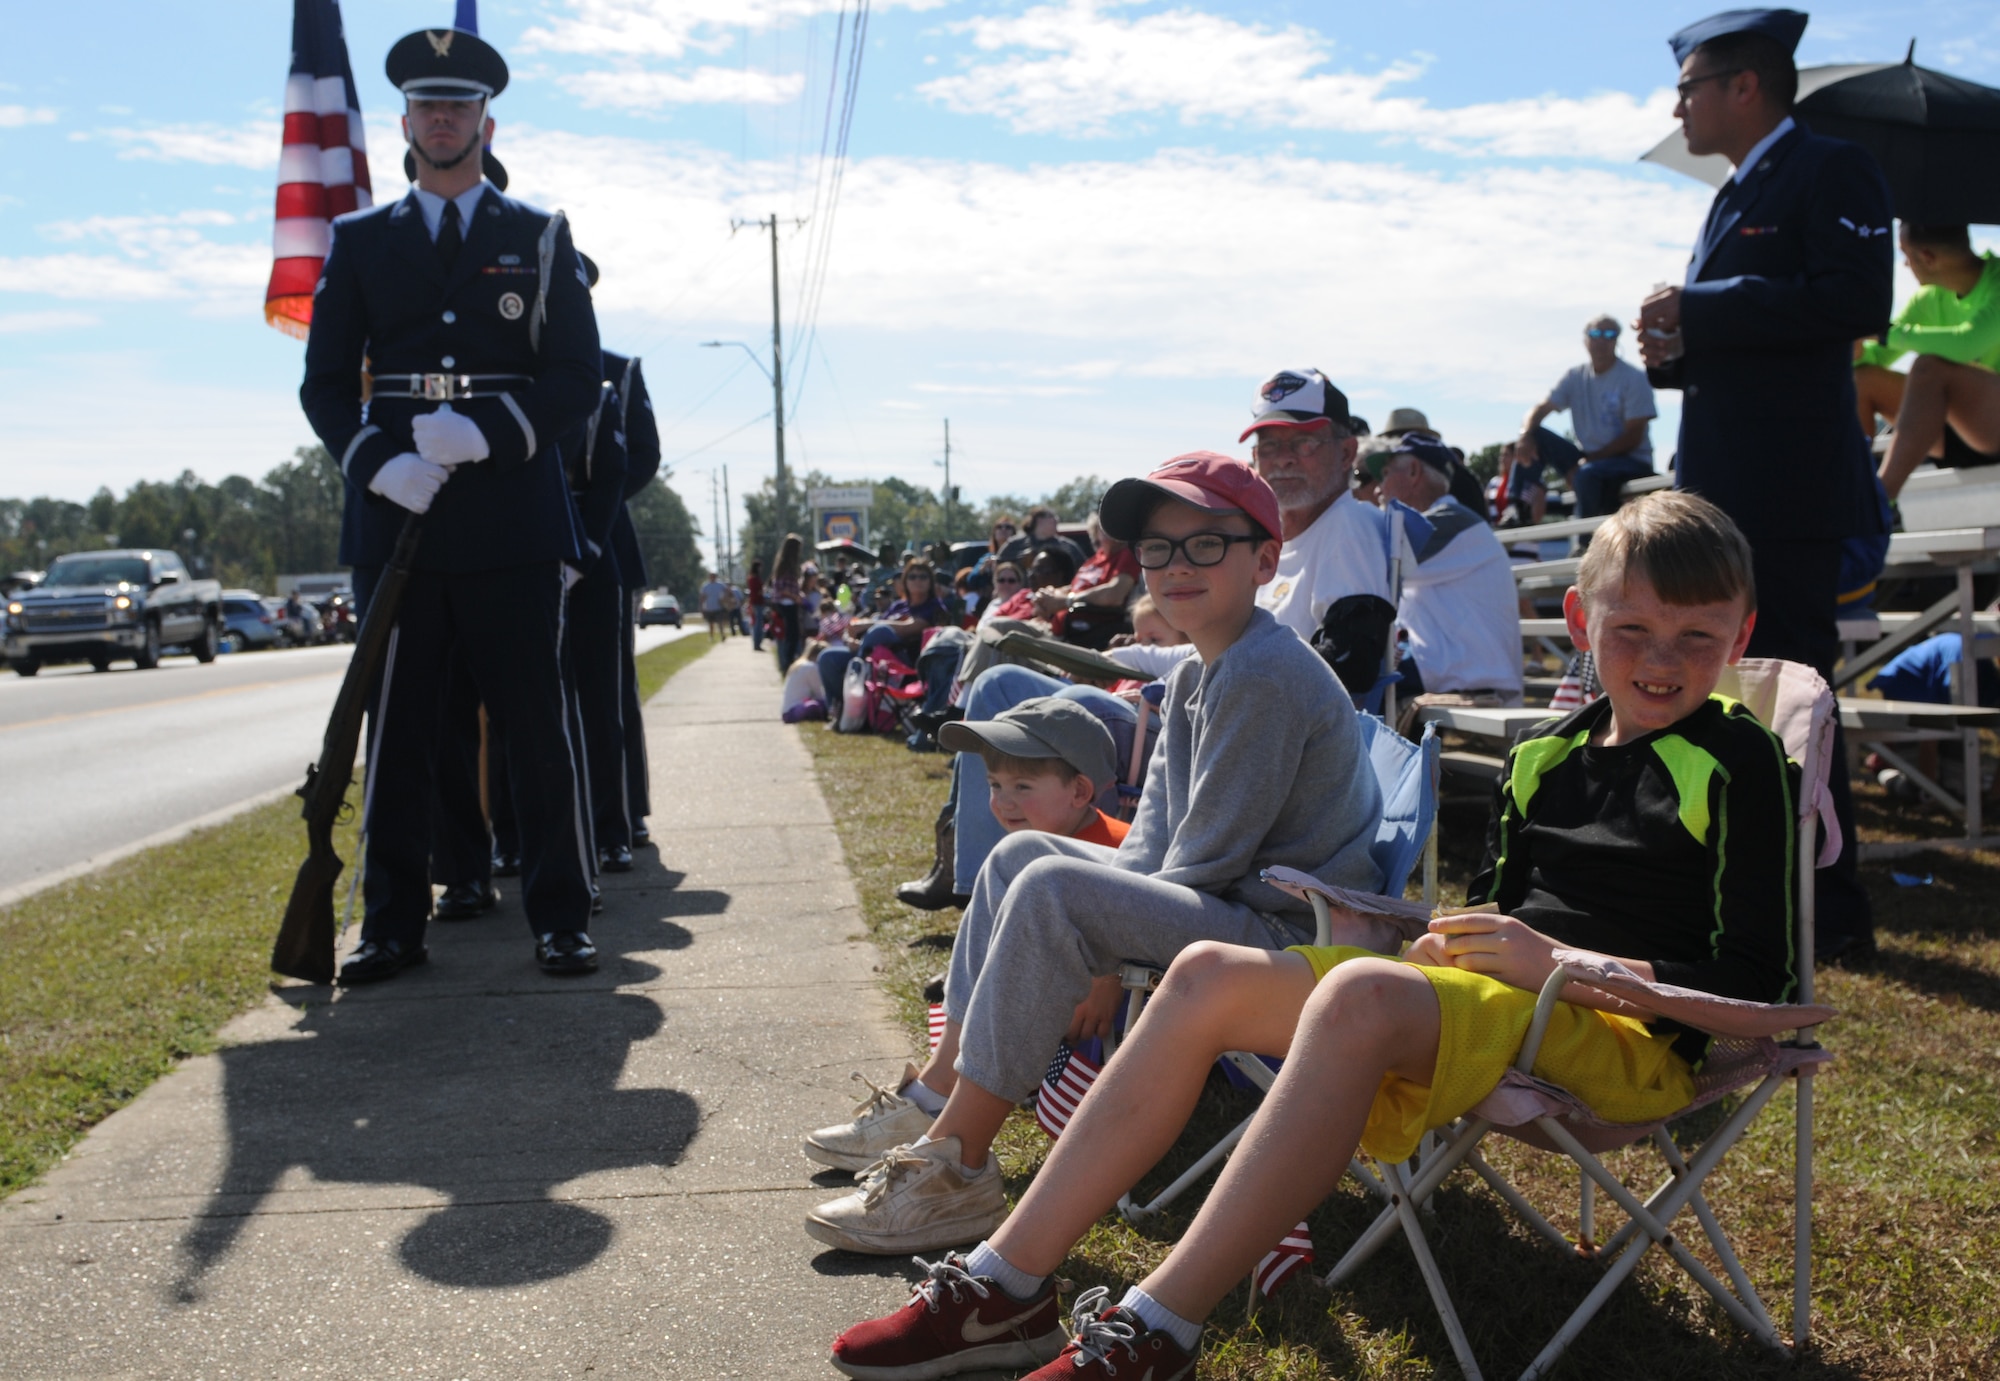 Attendees wait for the 16th Annual Gulf Coast Veterans Day Parade to begin Nov. 12, 2016, in D’Iberville, Miss. More than 5,000 Mississippi and Louisiana citizens watched the parade honoring Gulf Coast veterans. Keesler Honor Guard members, base leadership and more than 215 81st Training Group Airmen with the 50 State Flag Team and Drum and Bugle Corps also came out to celebrate the holiday. (U.S. Air Force photo by Senior Airman Holly Mansfield)